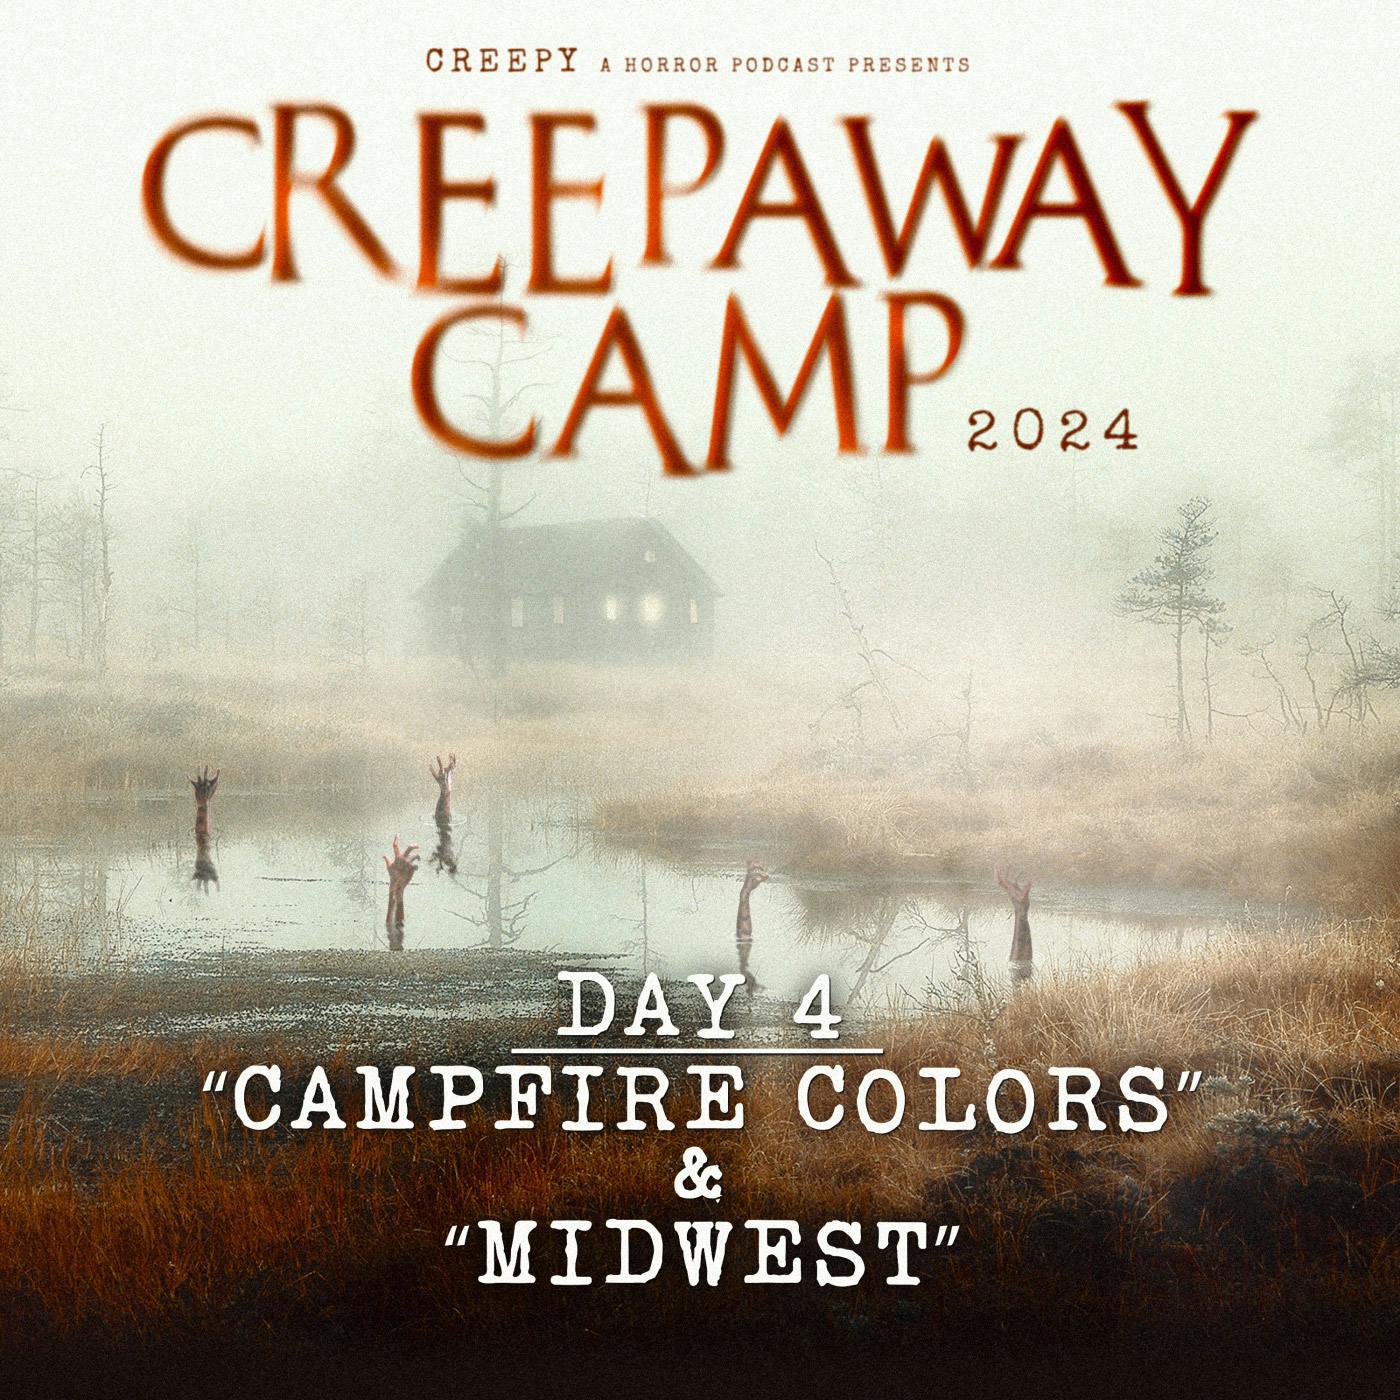 Creepaway Camp 2024: Day 4 - Campfire Colors & Midwest